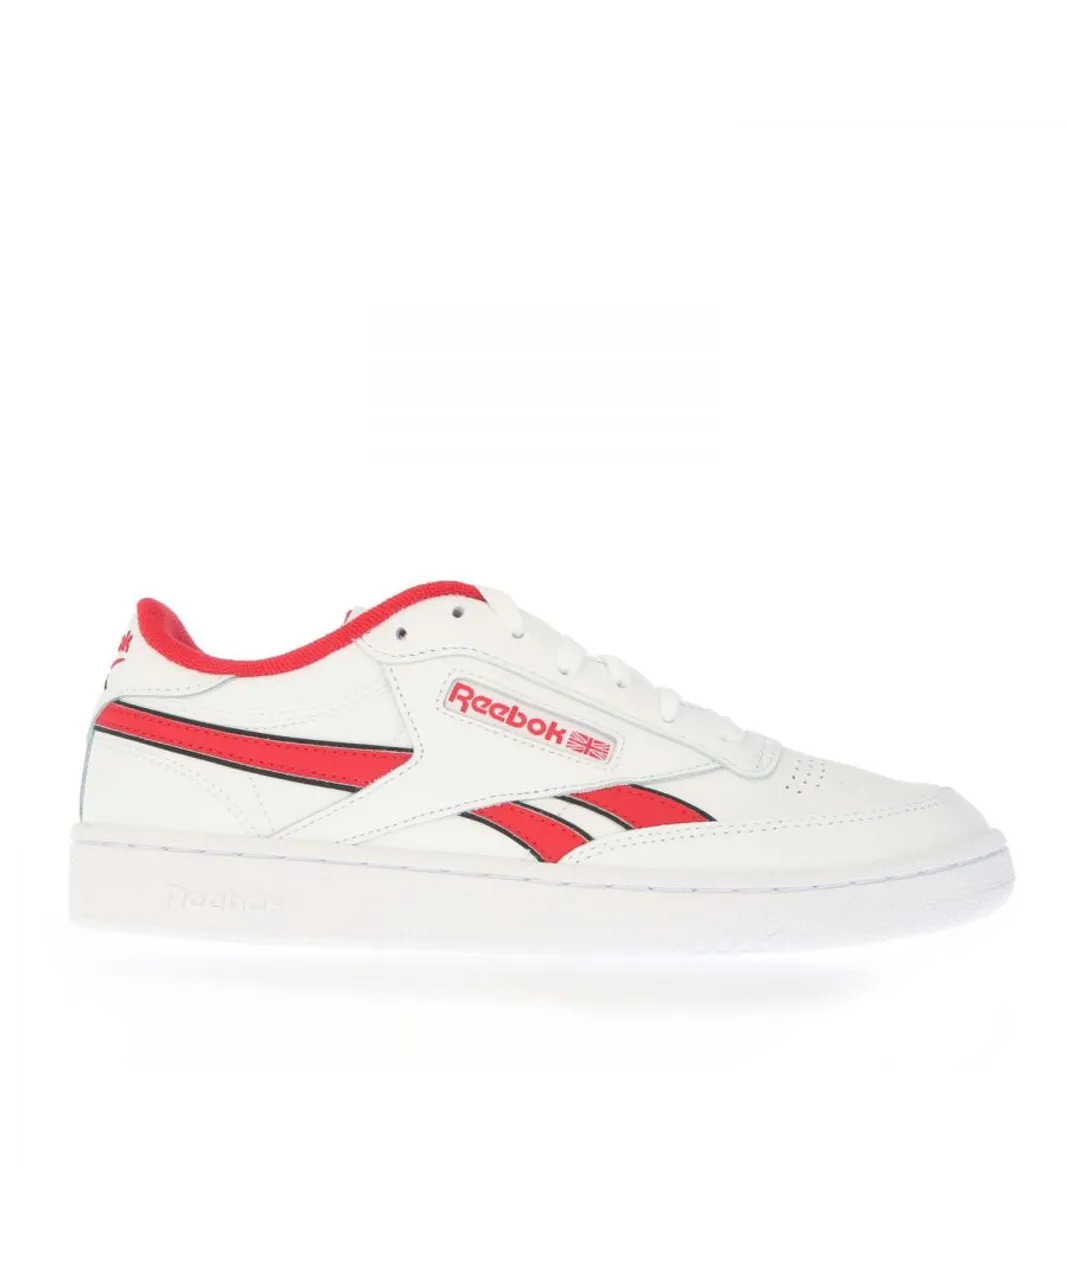 Reebok Mens Classics Club C Revenge Trainers in White red Leather (archived)